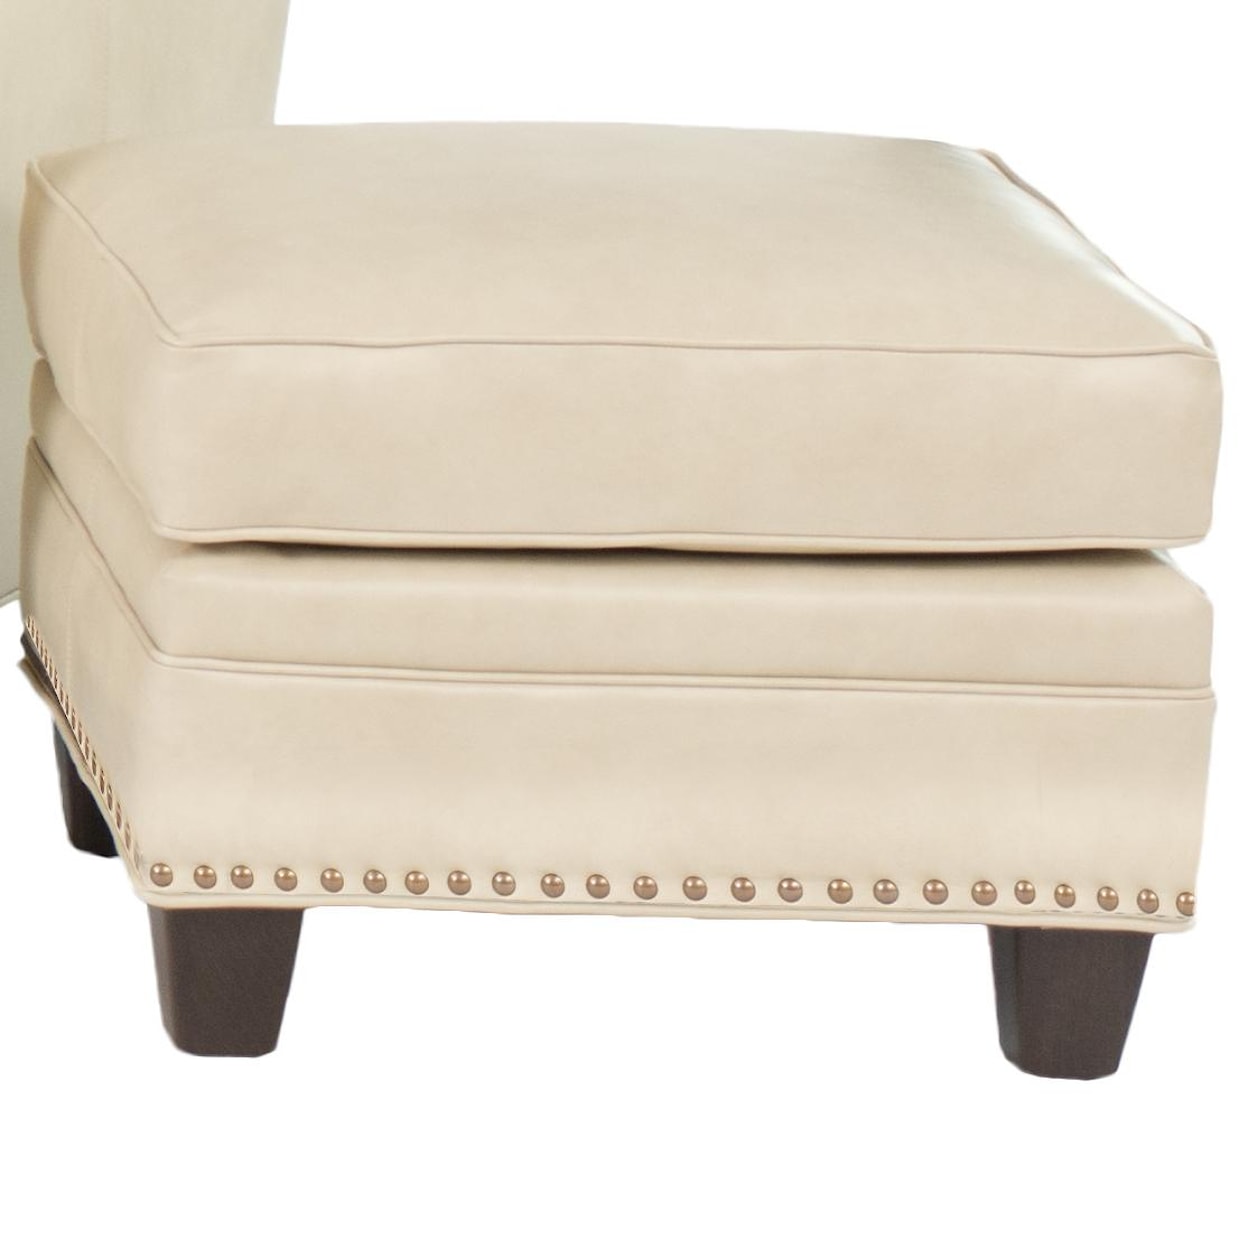 Smith Brothers 203 Transitional Ottoman